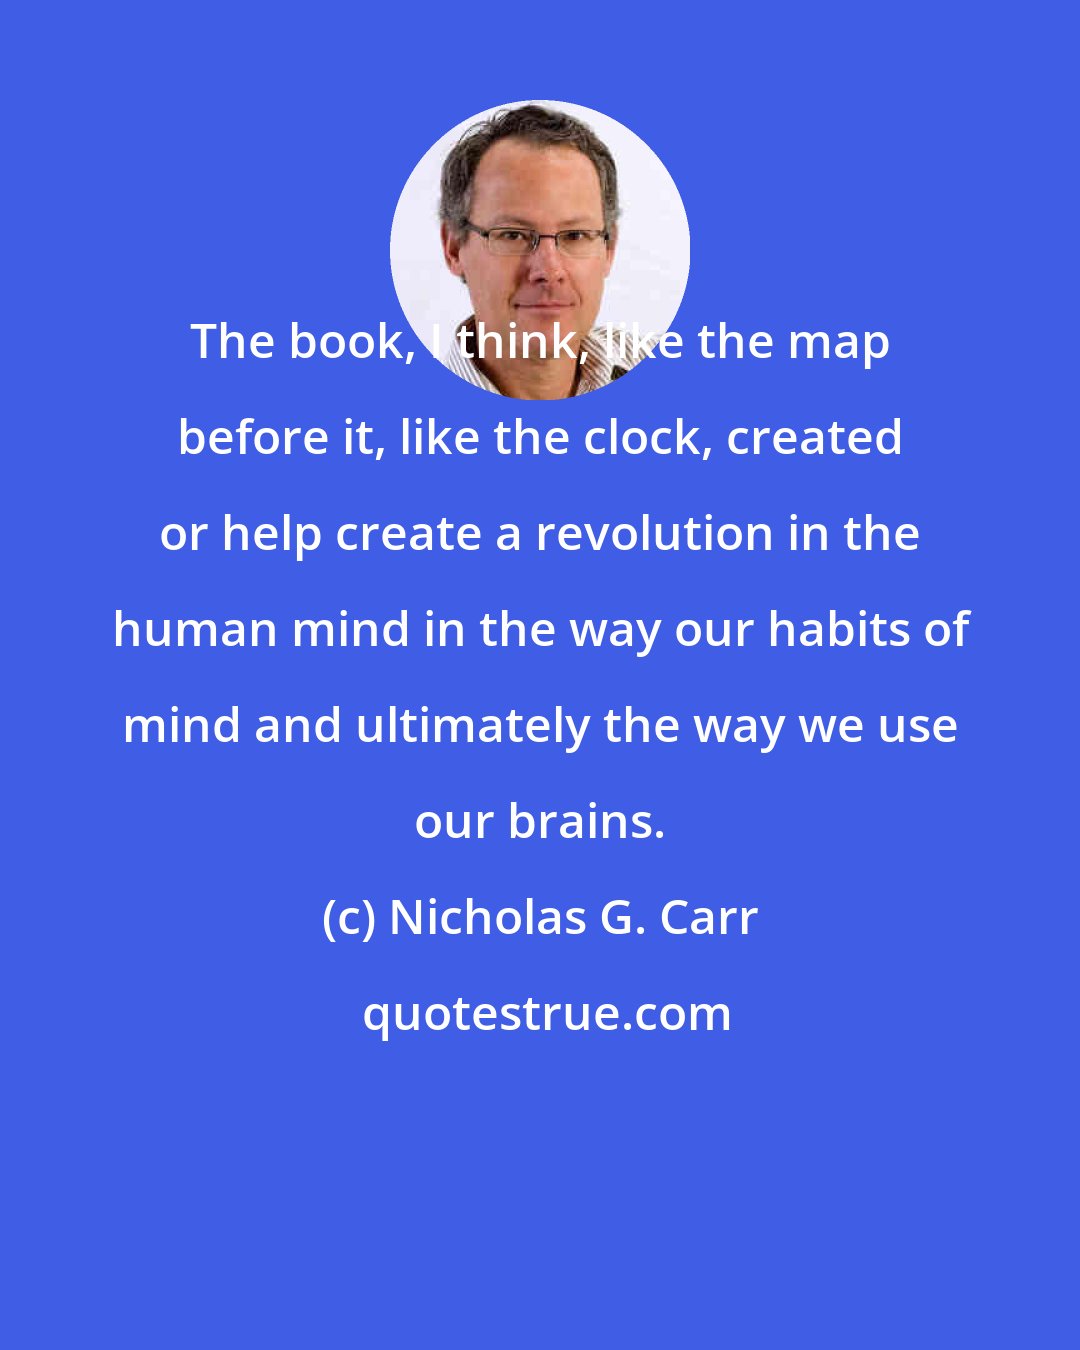 Nicholas G. Carr: The book, I think, like the map before it, like the clock, created or help create a revolution in the human mind in the way our habits of mind and ultimately the way we use our brains.